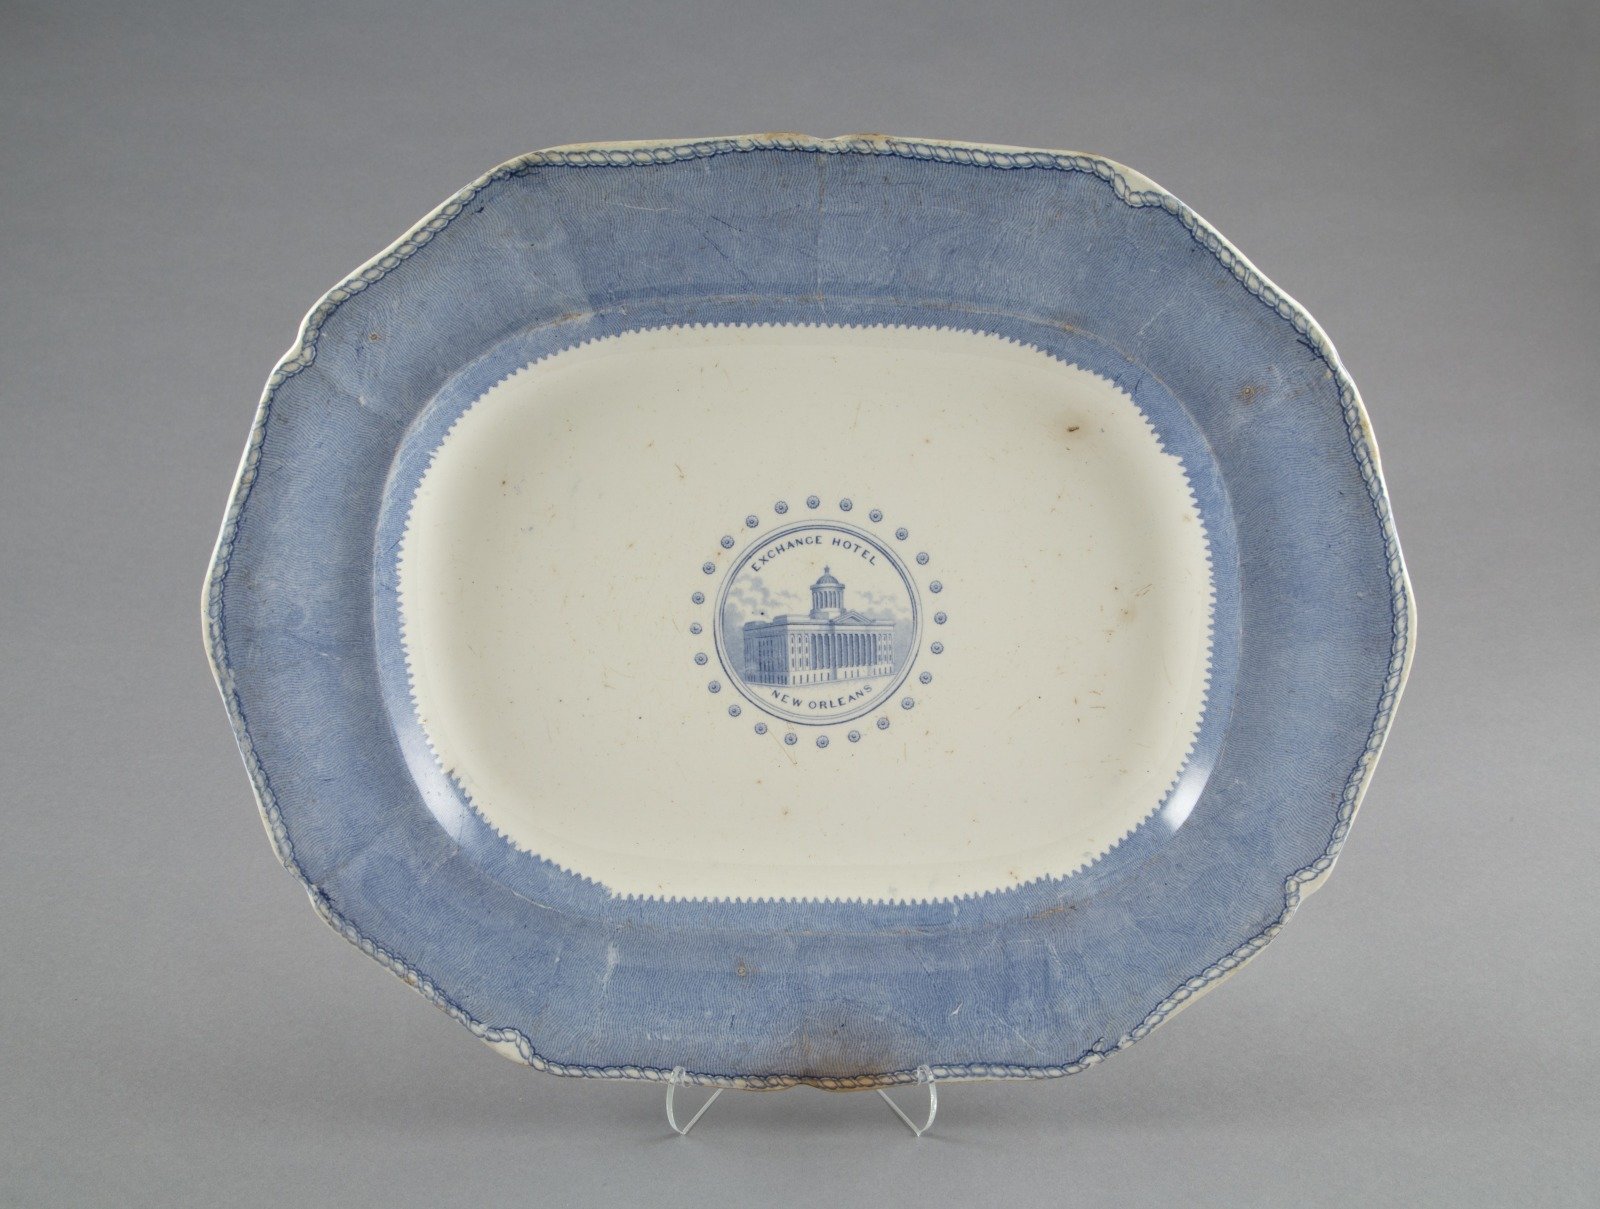   Exchange Hotel, New Orleans platter  1836; transfer-printed earthenware manufactured by Davenport Pottery (Staffordshire, England); retailed by Henderson &amp; Gaines (New Orleans)  The Historic New Orleans Collection, 1977.30  